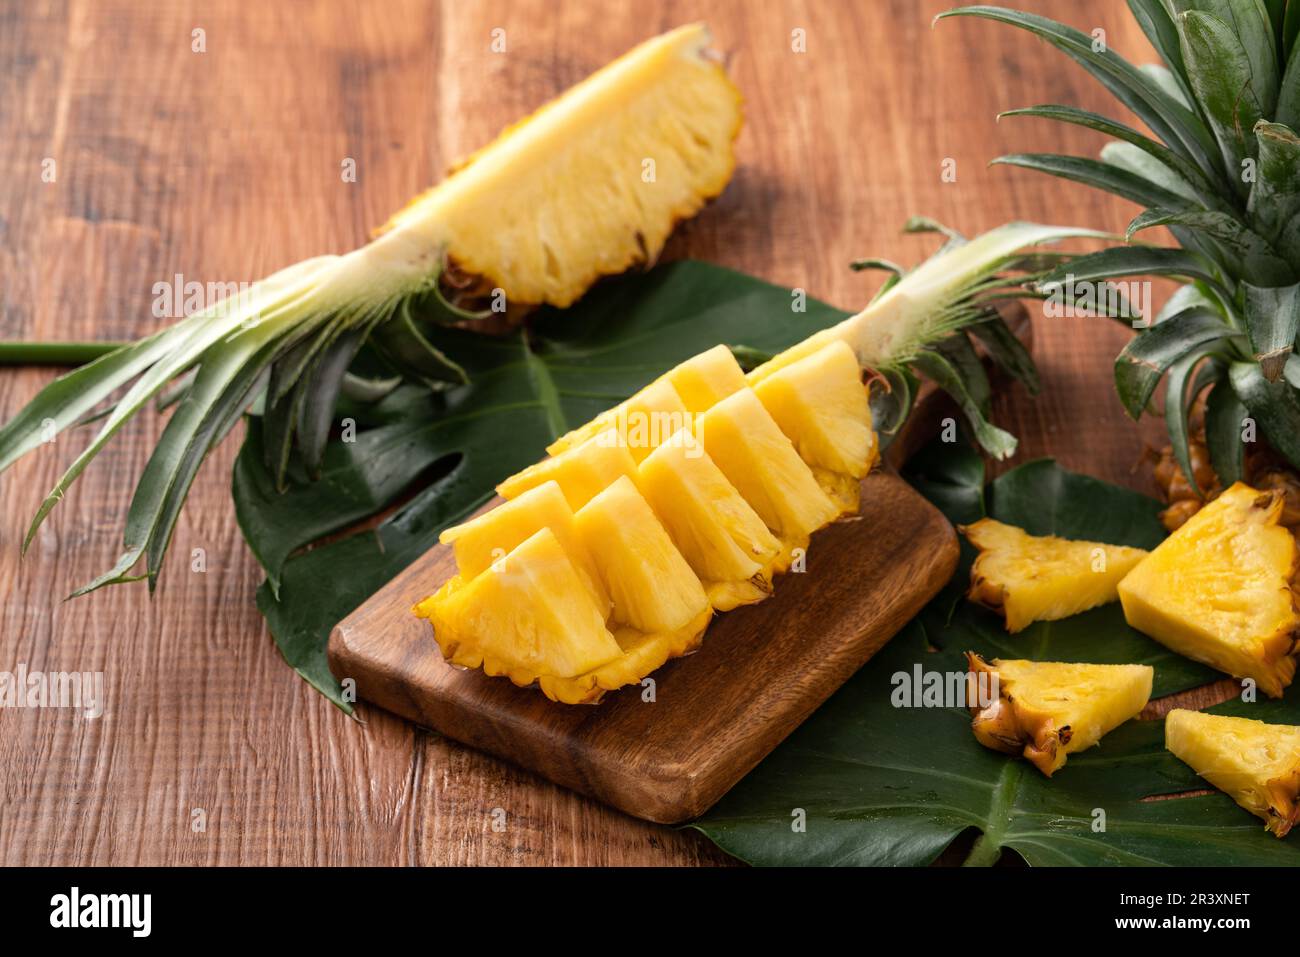 Close up of fresh cut pineapple on a tray over dark wooden table background. Stock Photo